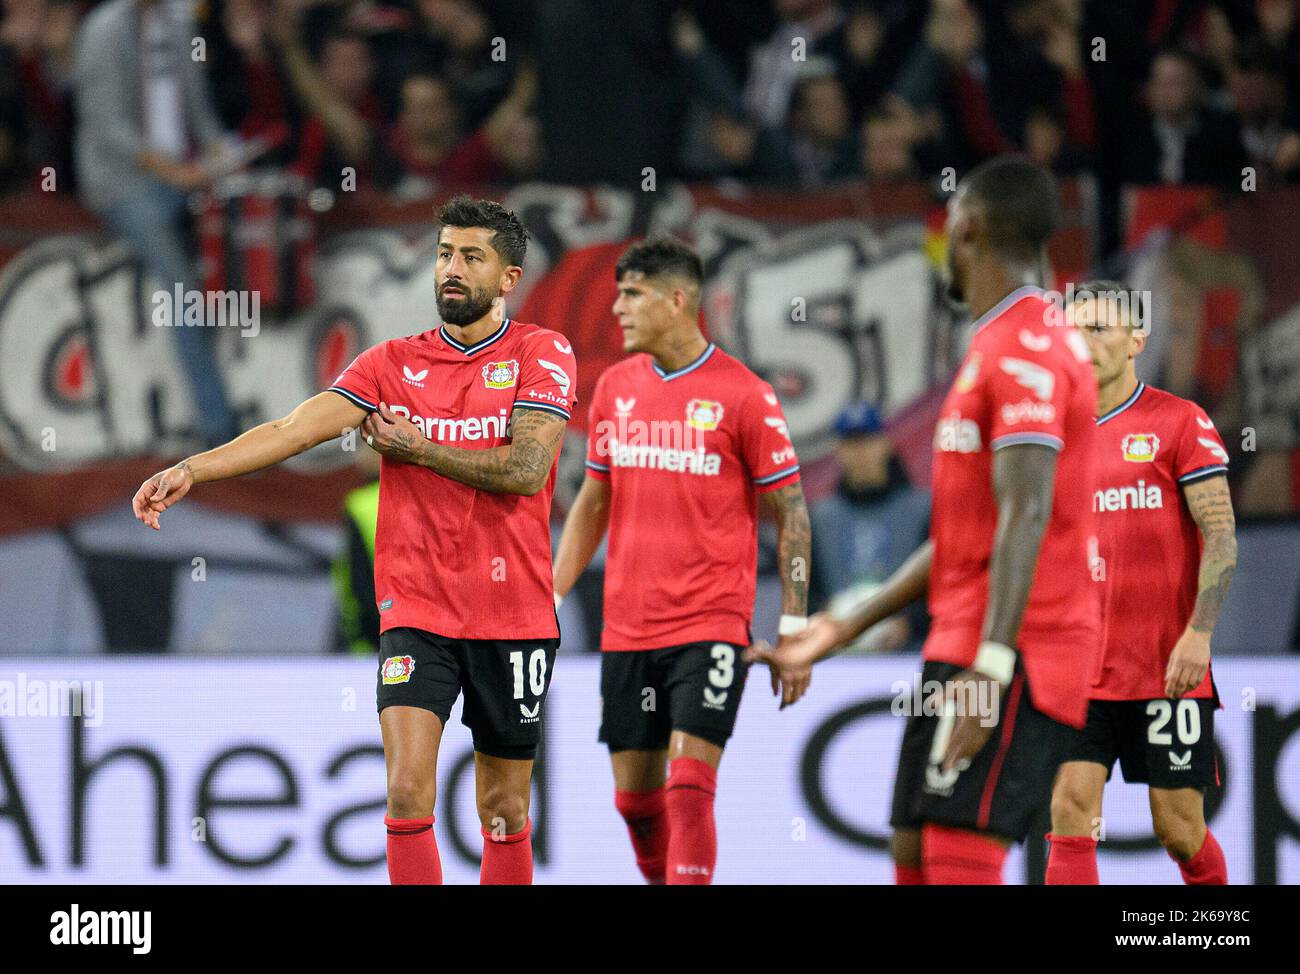 left to right Kerem DEMIRBAY (LEV), Piero HINCAPIE (LEV), Charles ARANGUIZ (LEV) disappointed. Soccer Champions League, preliminary round 4th matchday, Bayer 04 Leverkusen (LEV) - FC Porto, on October 12th, 2022 in Leverkusen/ Germany. © Stock Photo